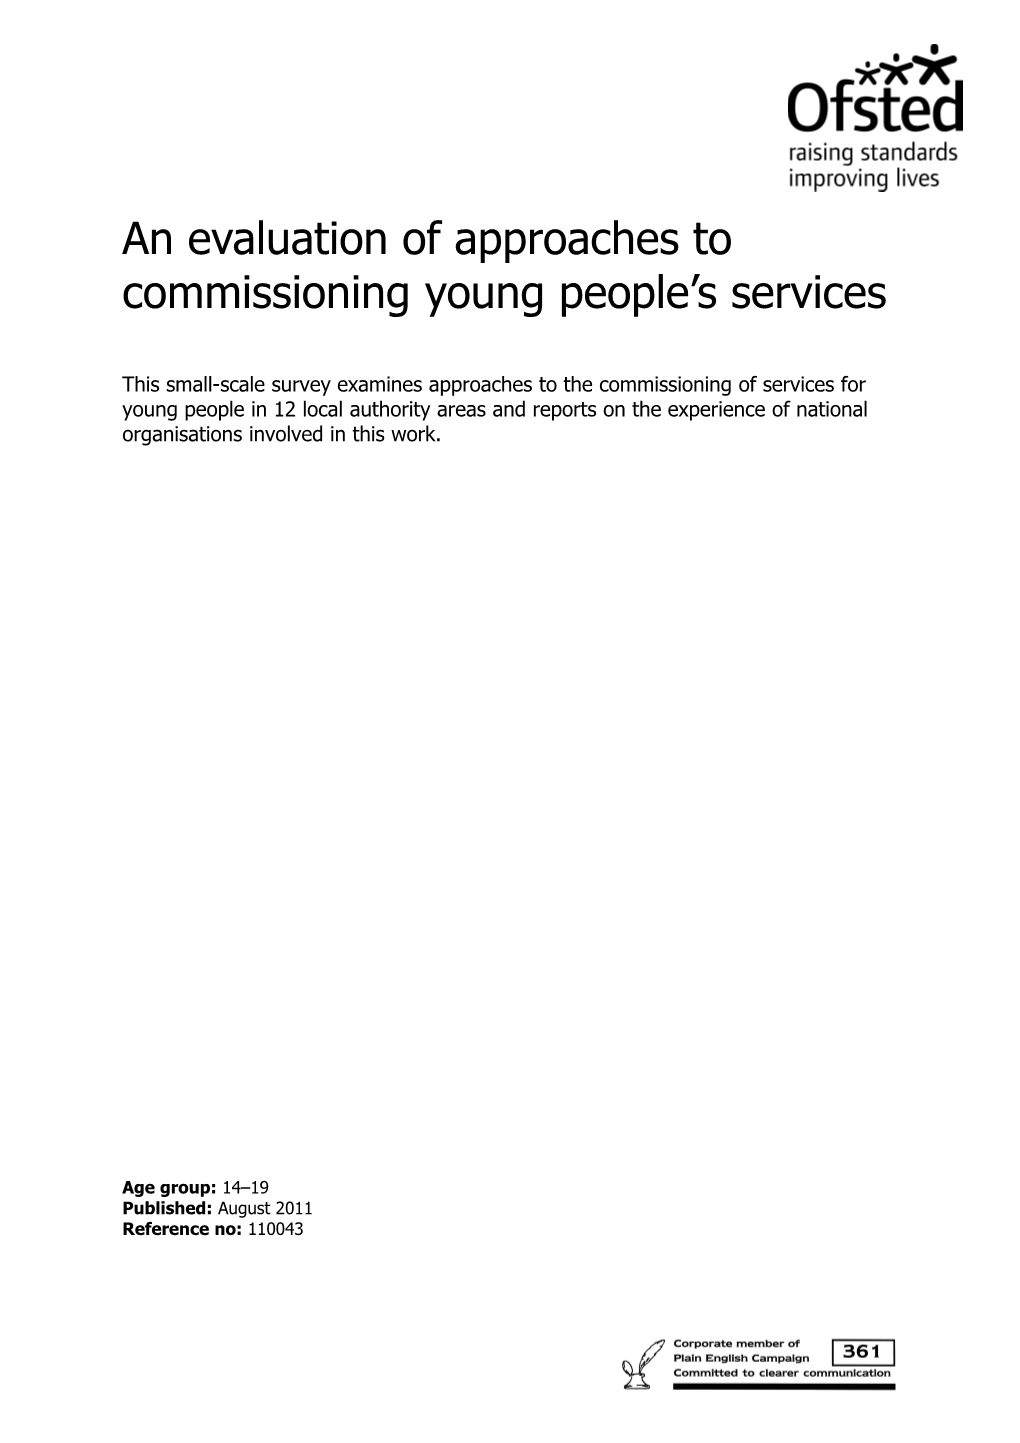 An Evaluation of Approaches to Commissioning Young People S Services